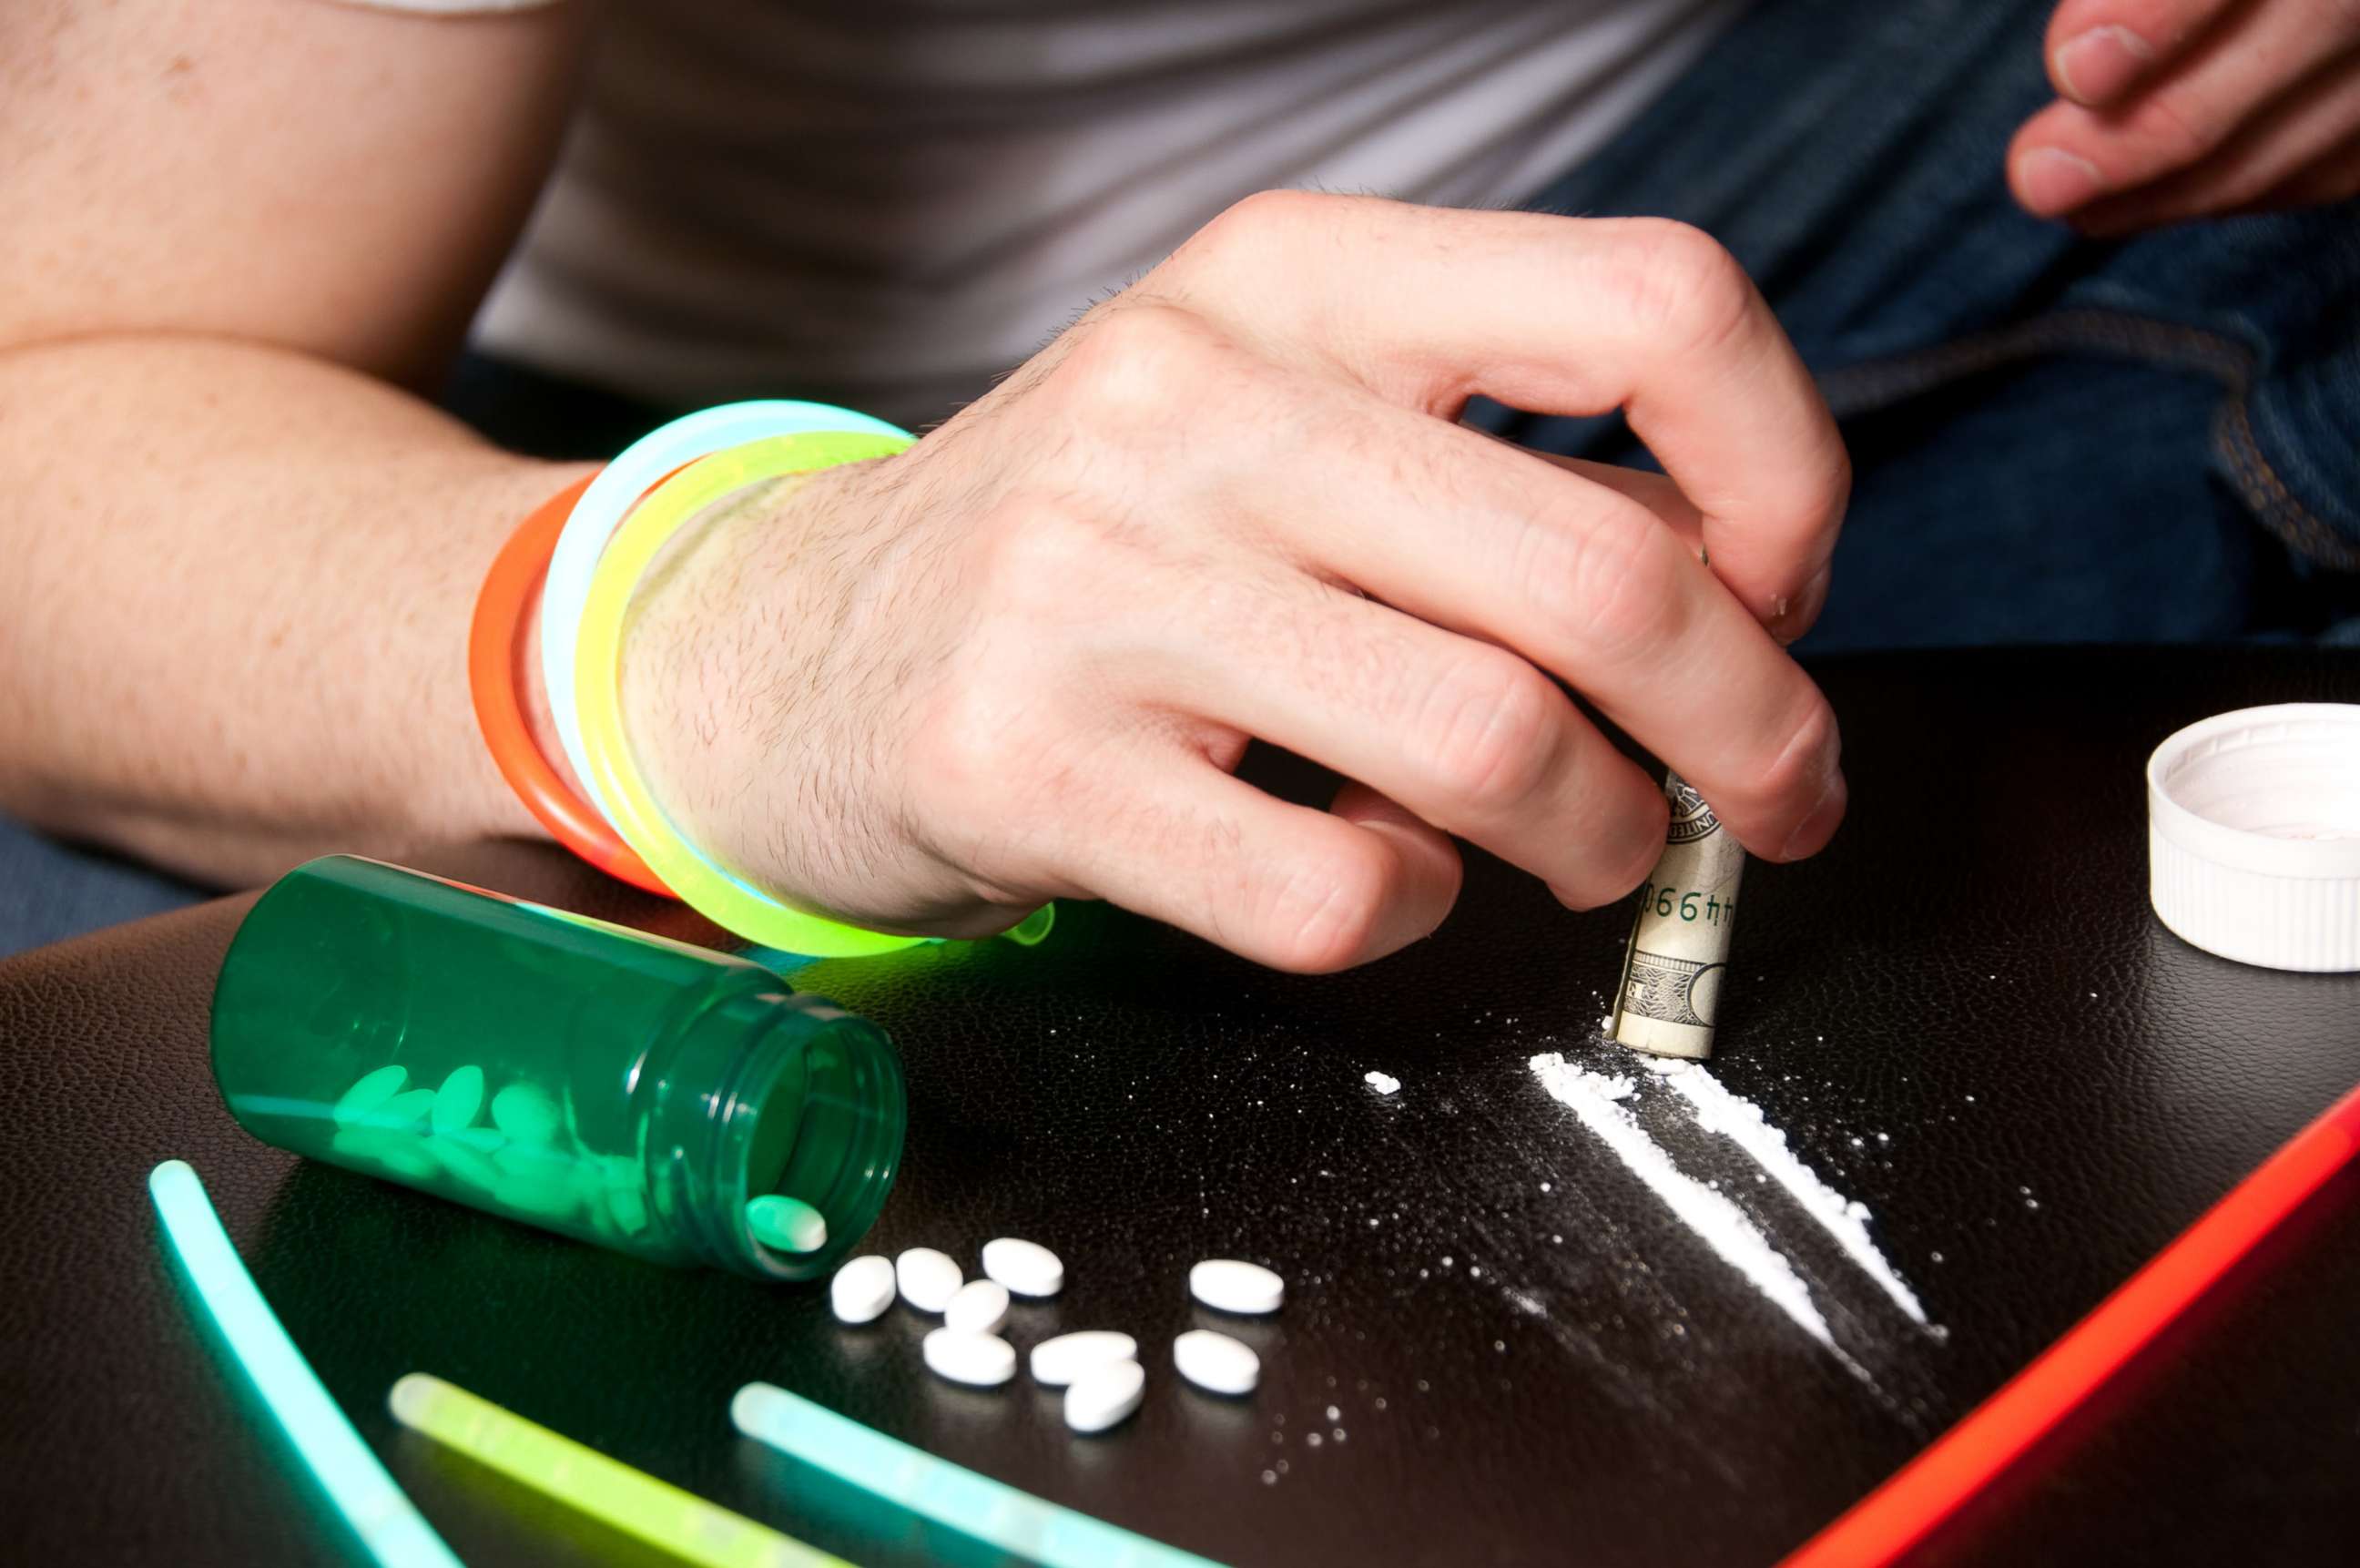 PHOTO: A young mans handles opioids in this undated stock photo.